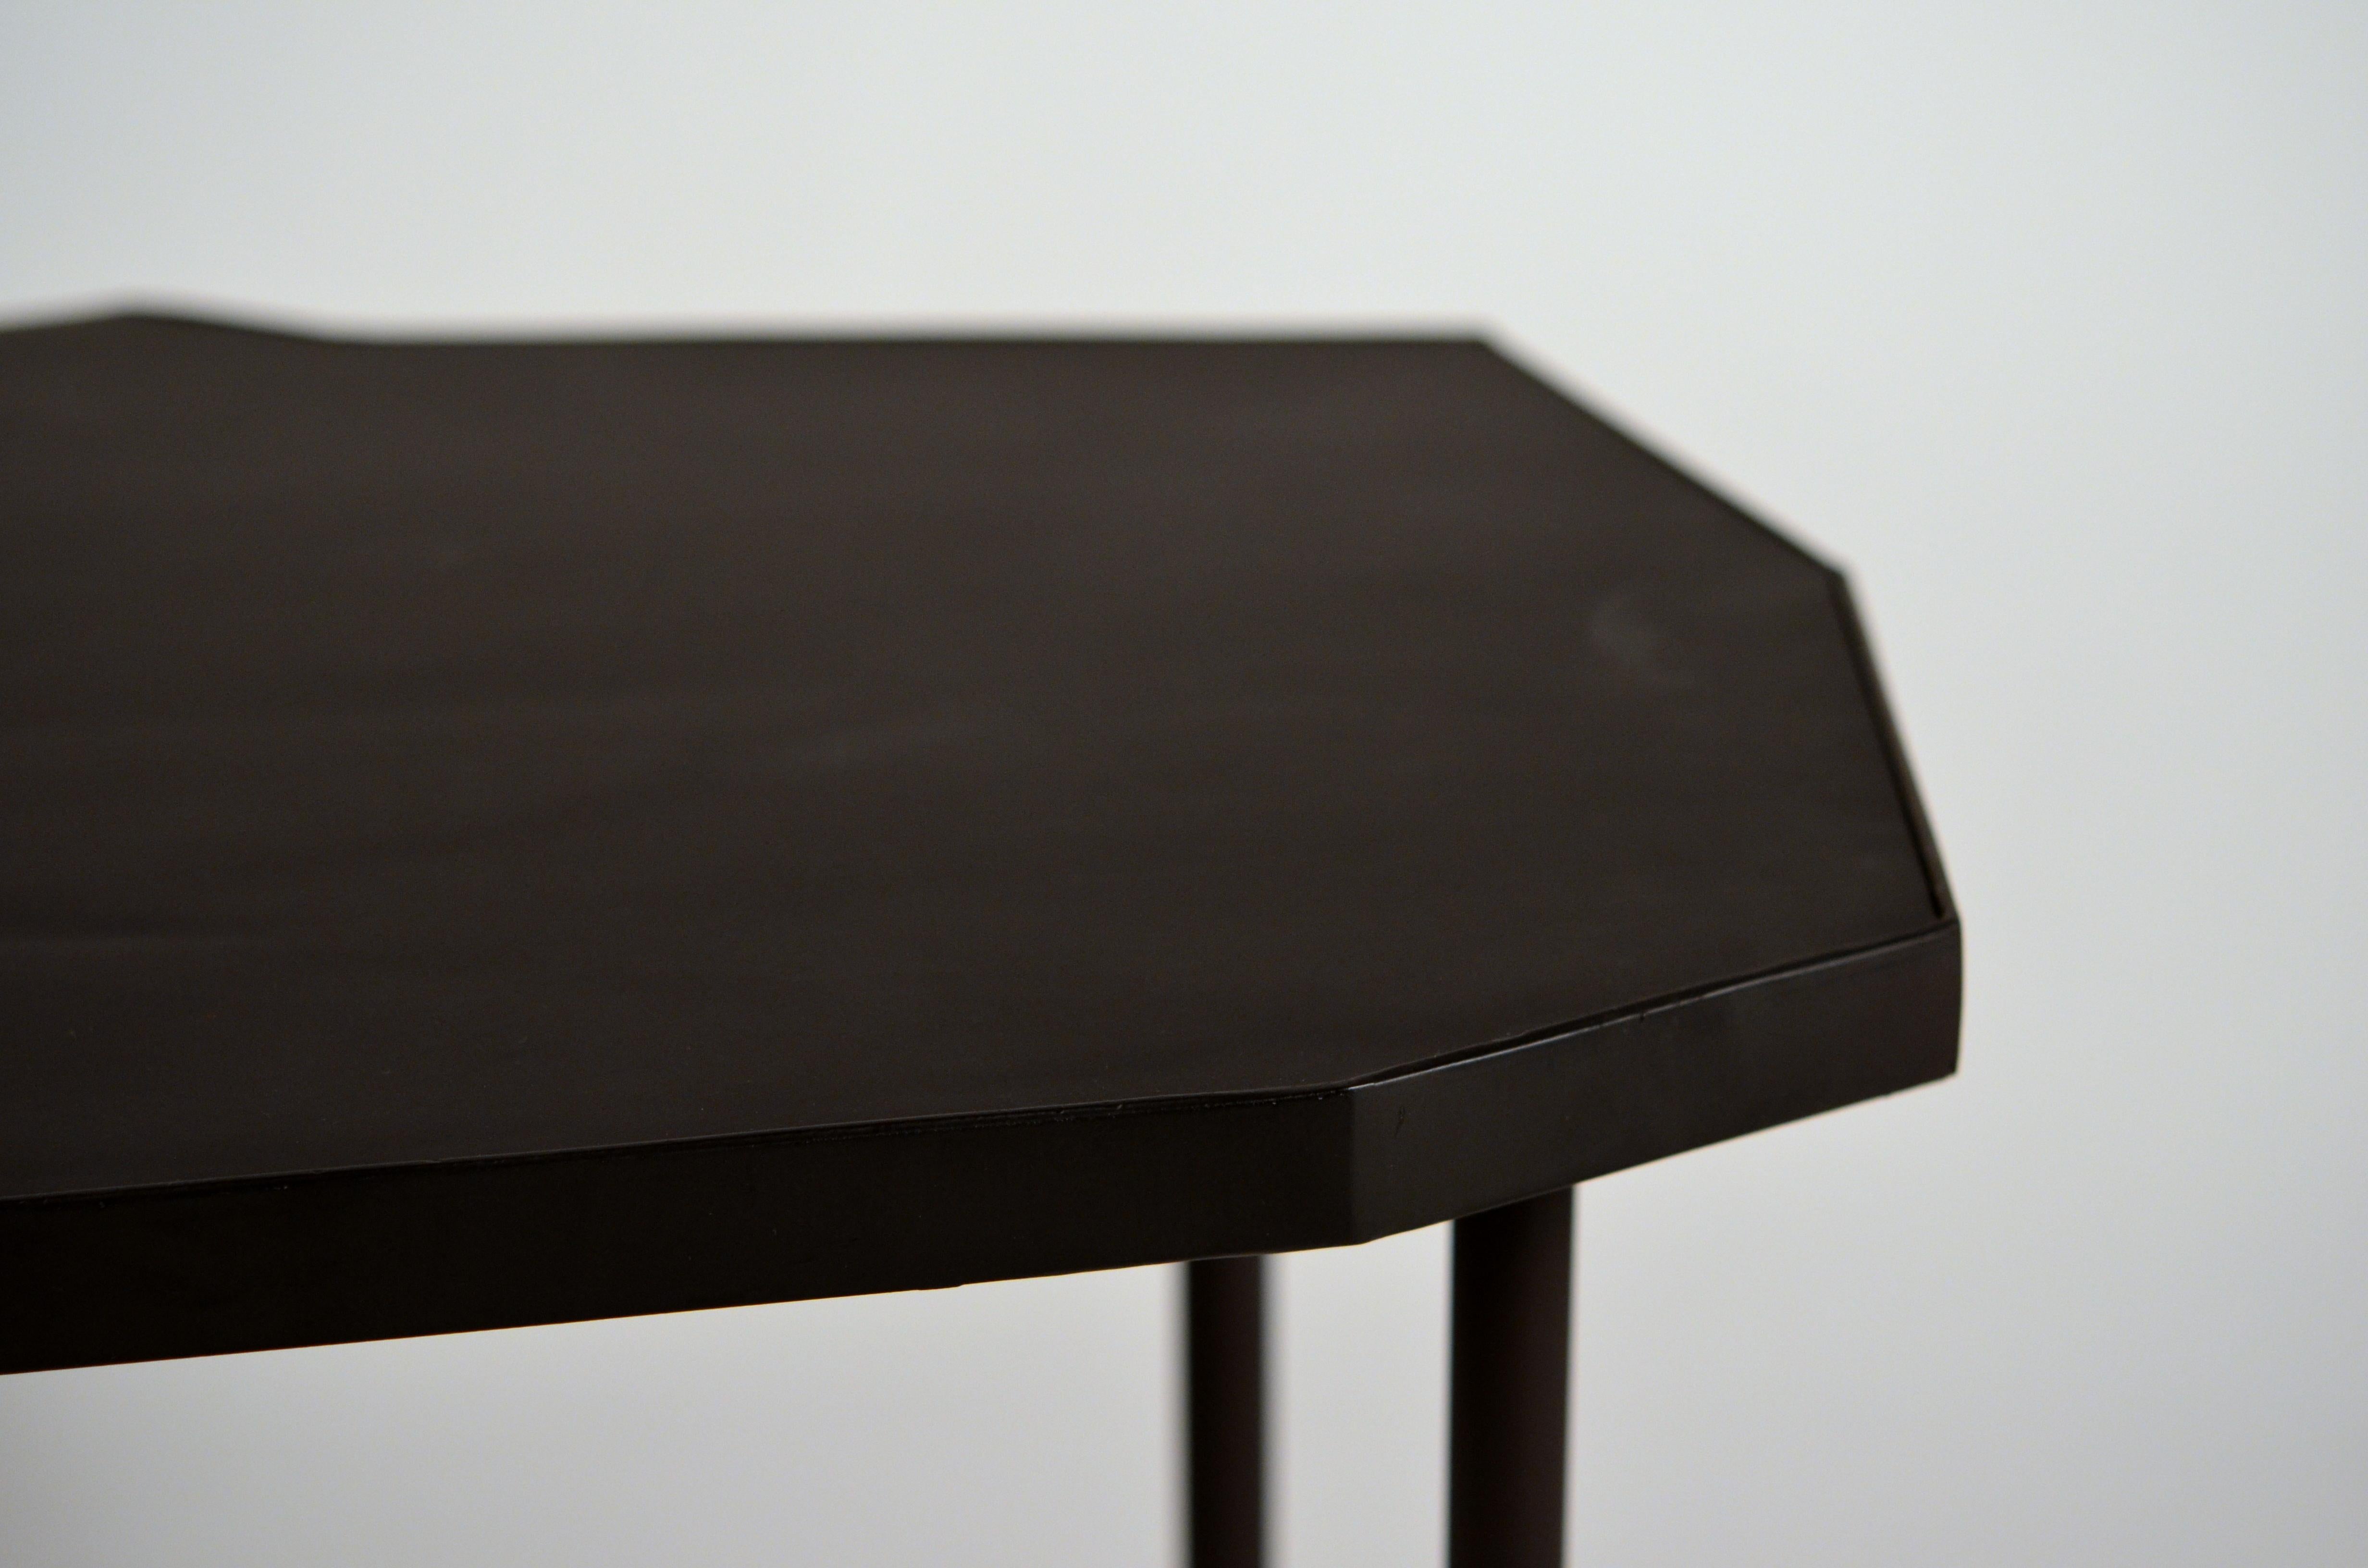 Contemporary Pair of Asymmetrical 'Décagone' Black Leather Side Tables by Design Frères For Sale